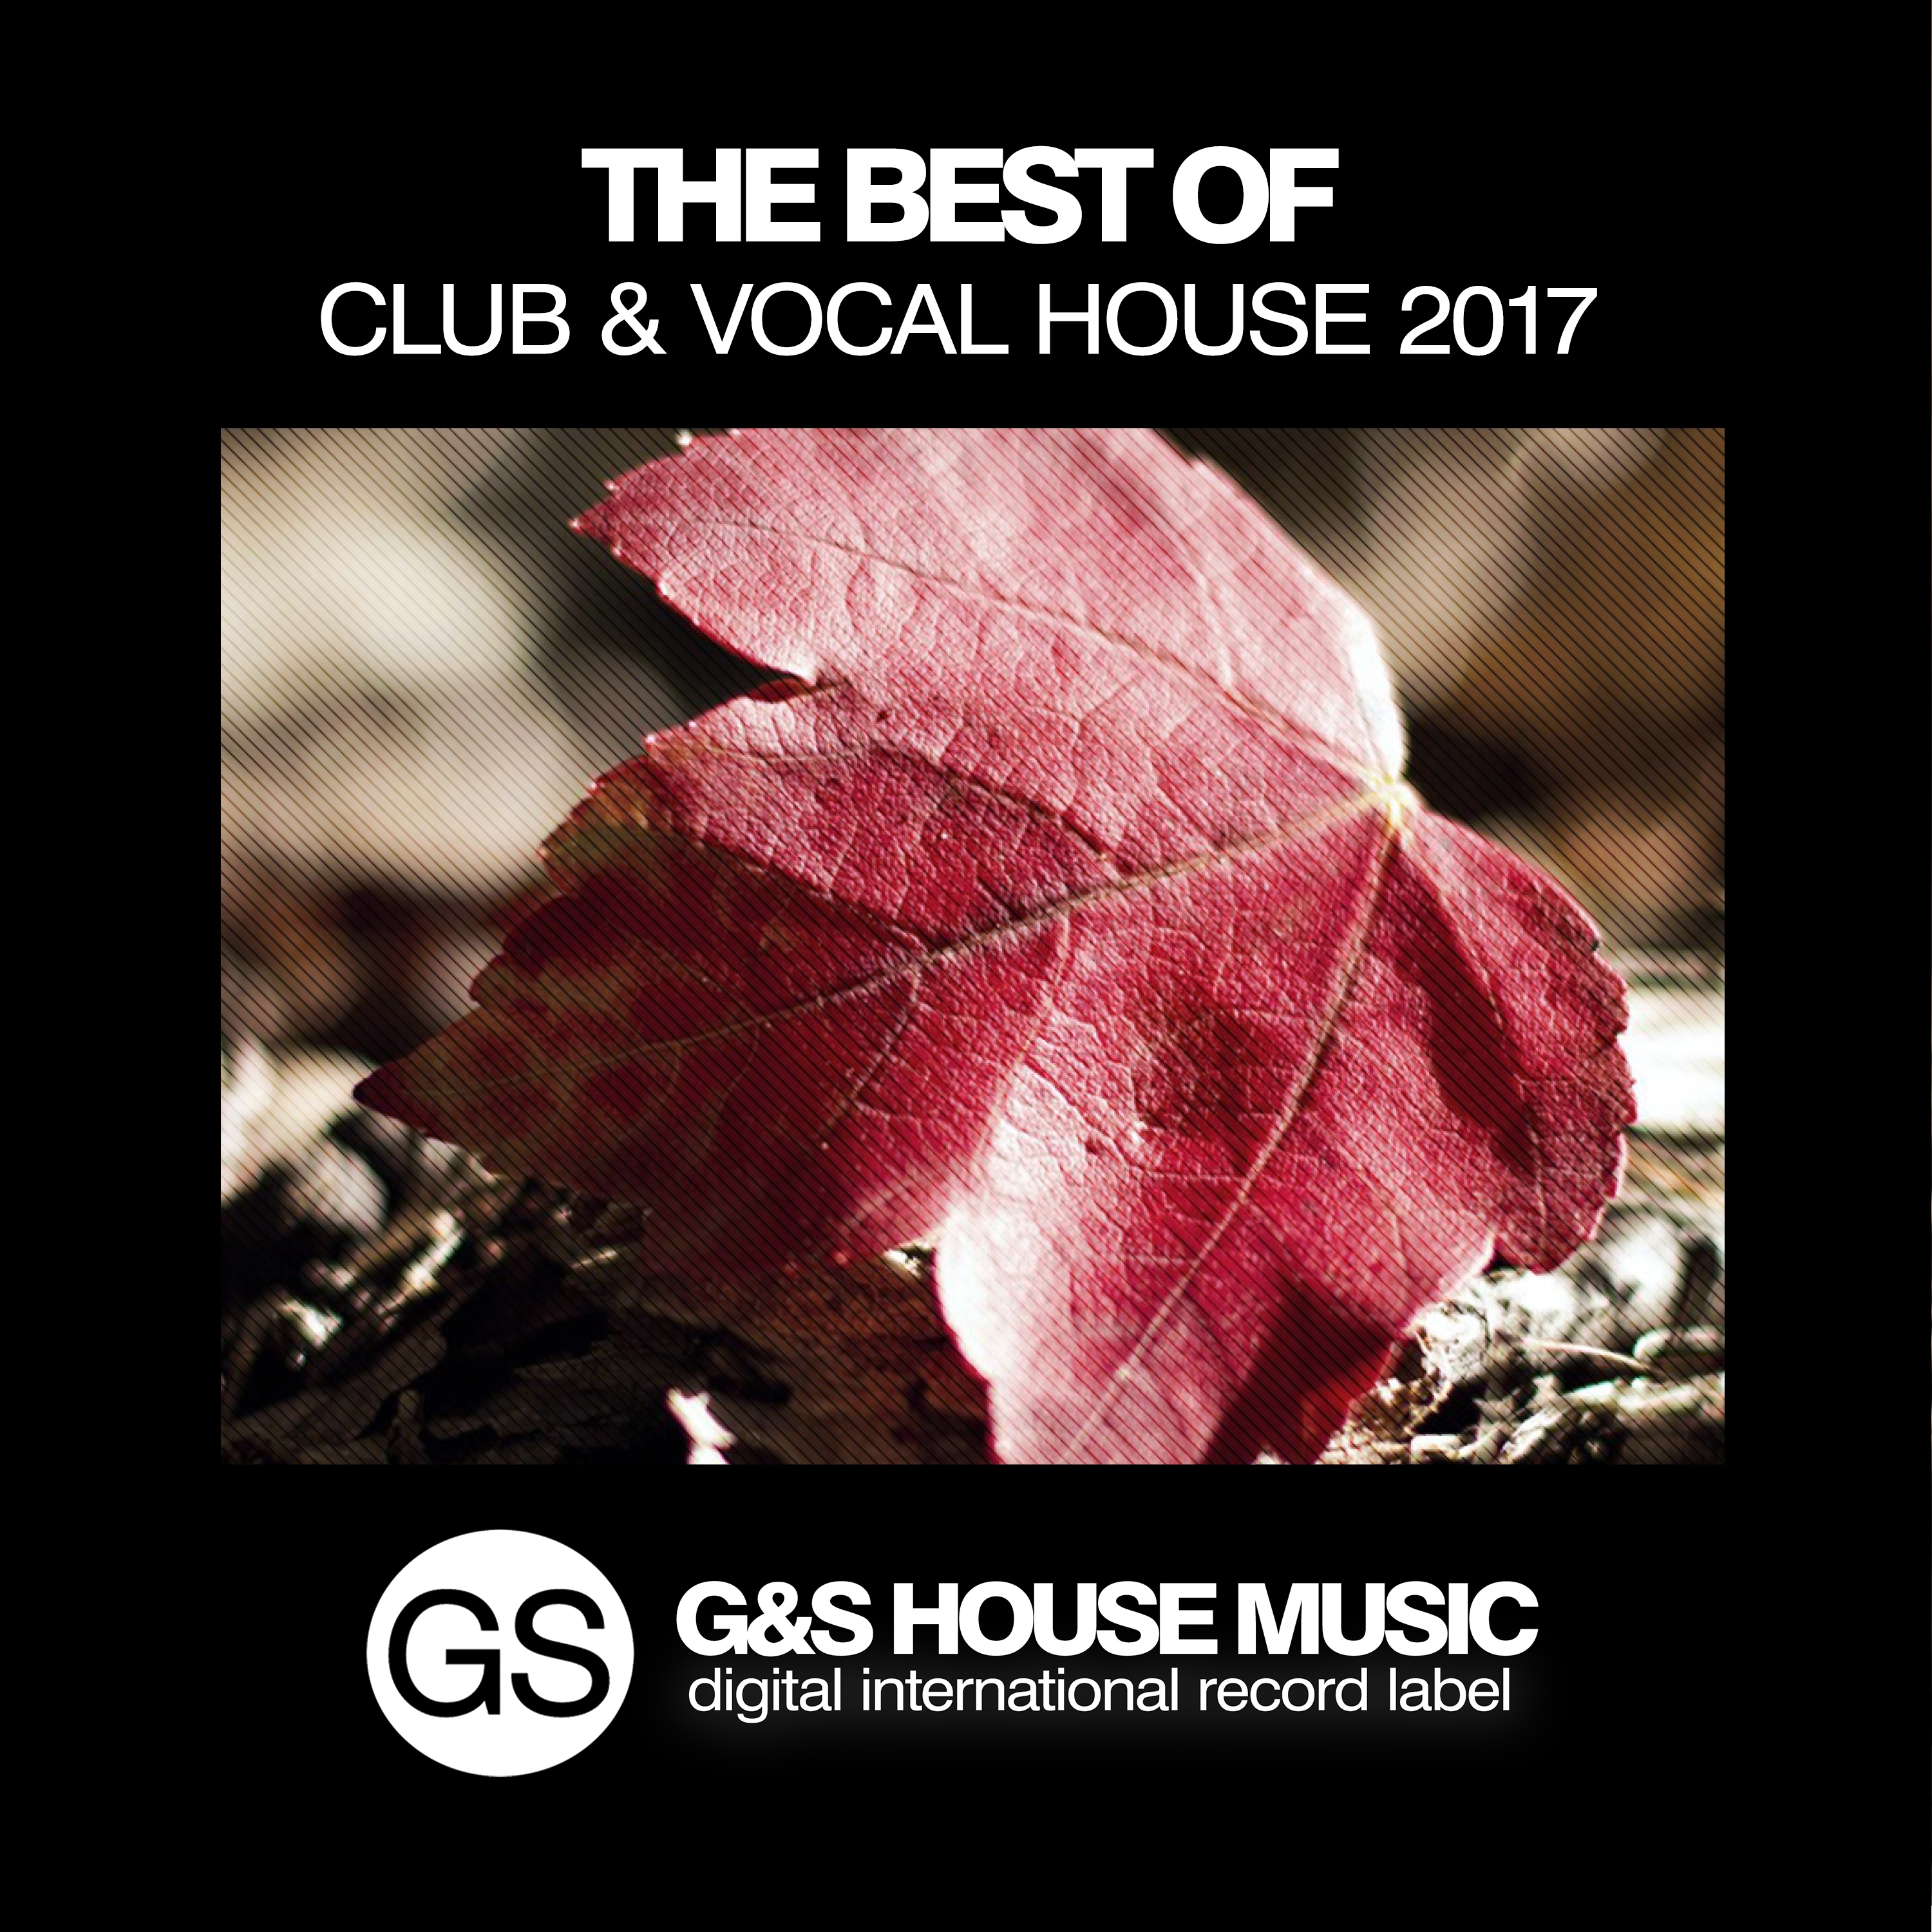 The Best of Club & Vocal House 2017